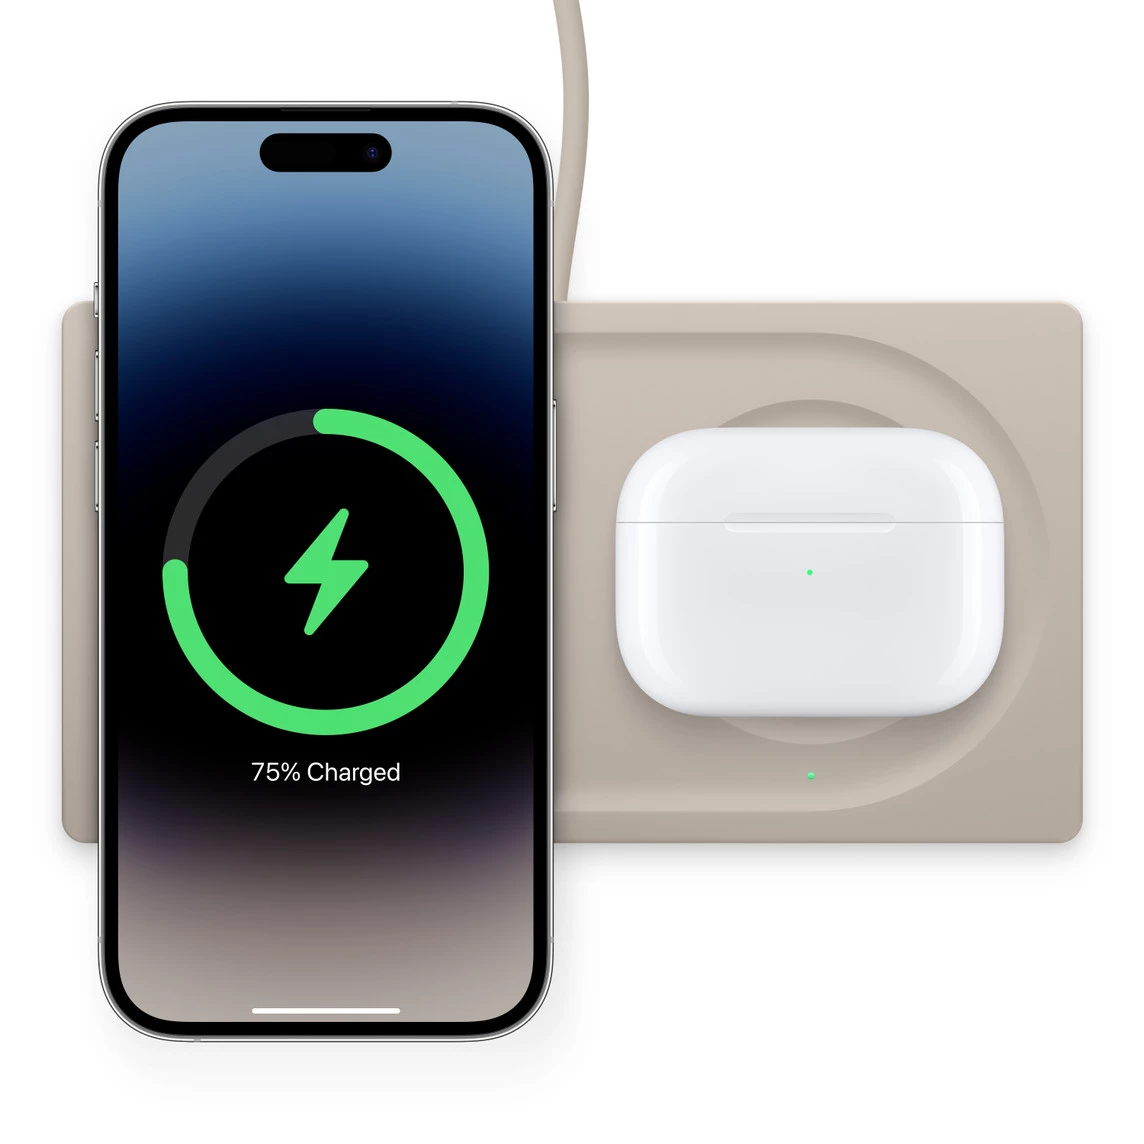 Buy Belkin Boost Charge 3in1 Qi Charger (WIZ001VFBK)